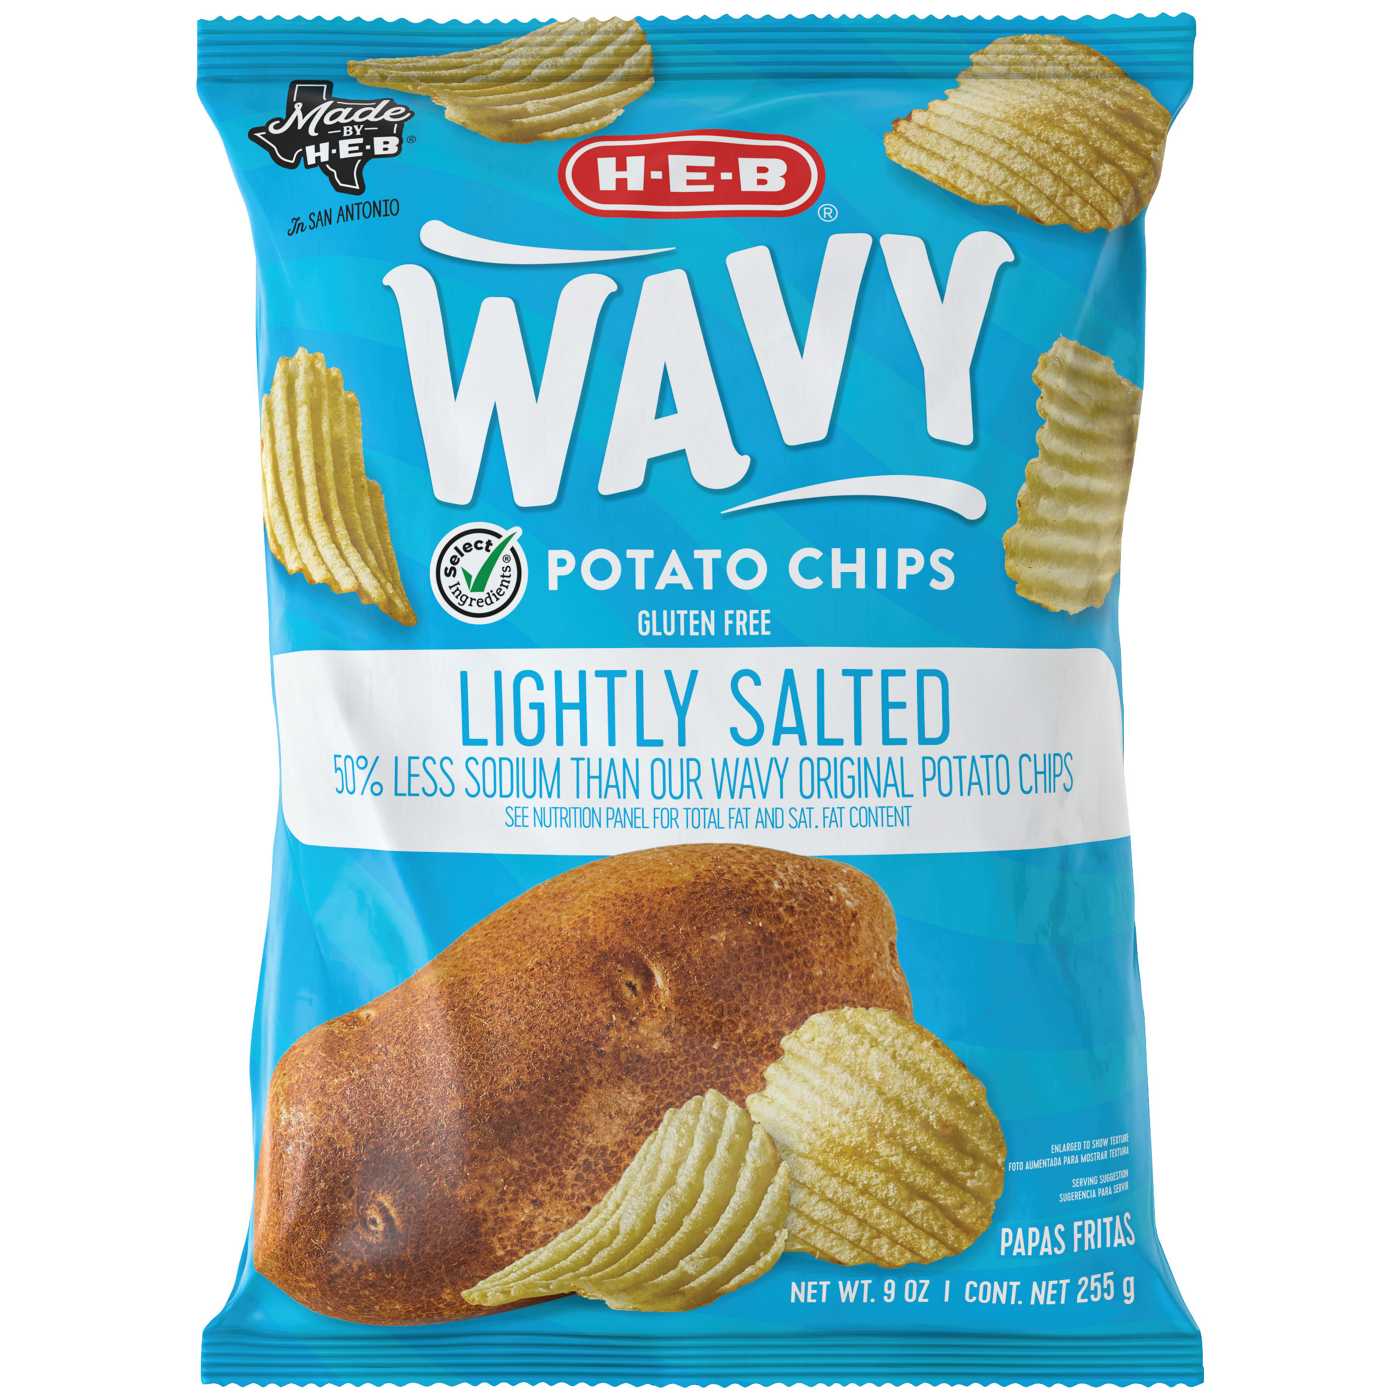 H-E-B Wavy Potato Chips - Lightly Salted; image 1 of 3